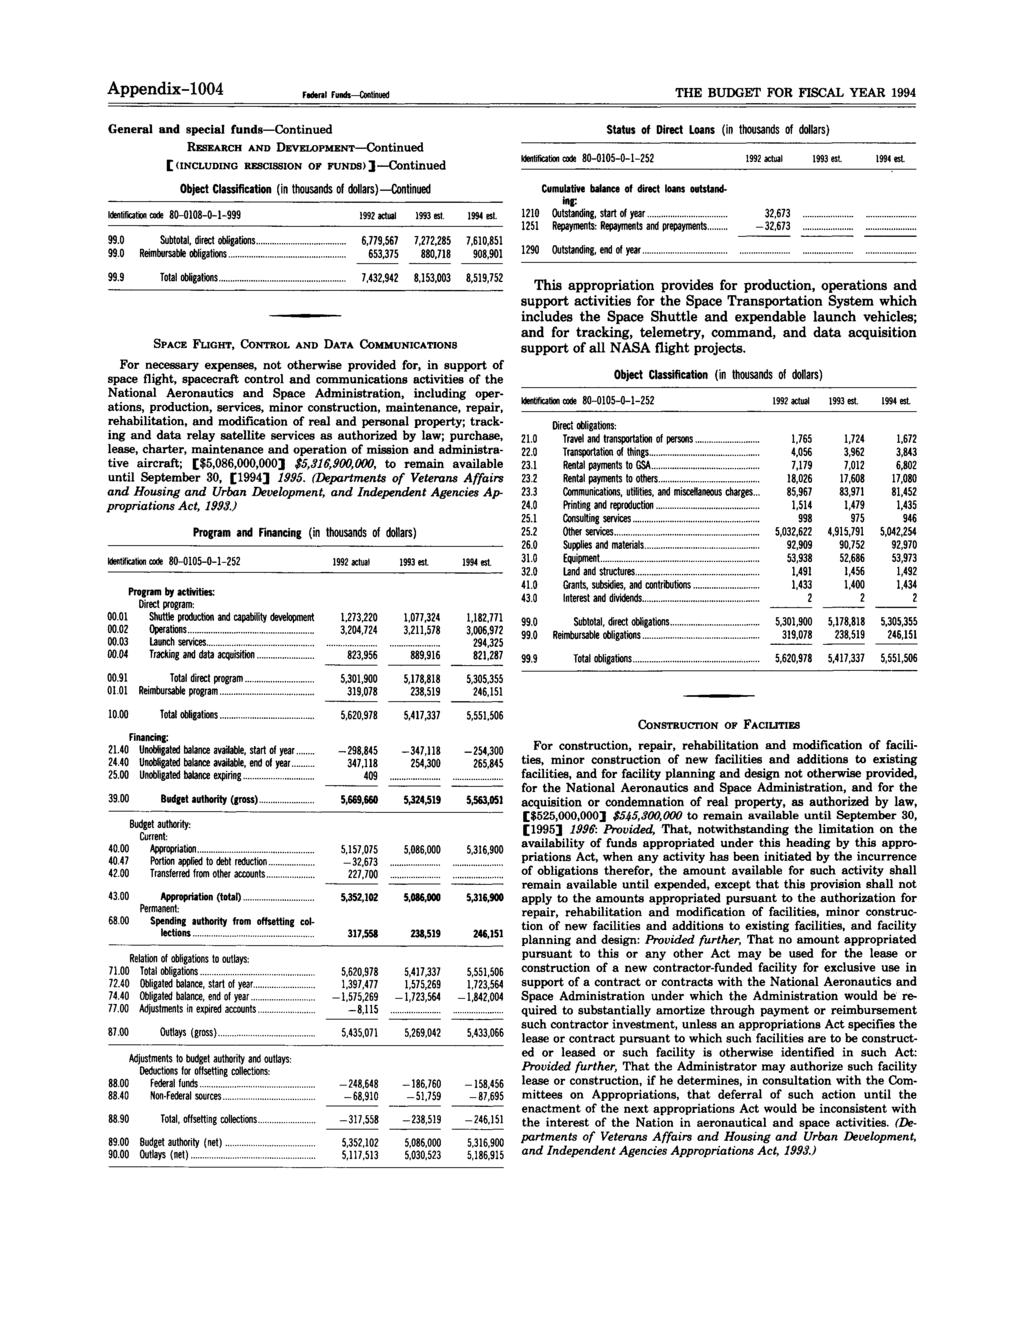 1994 Appendix-14 Federa, Funds_continued the budget for fiscal year 1994 General and special funds Continued RESEARCH AND DEVELOPMENT Continued [(INCLUDING RESCISSION OF FUNDS) ] Continued Continued